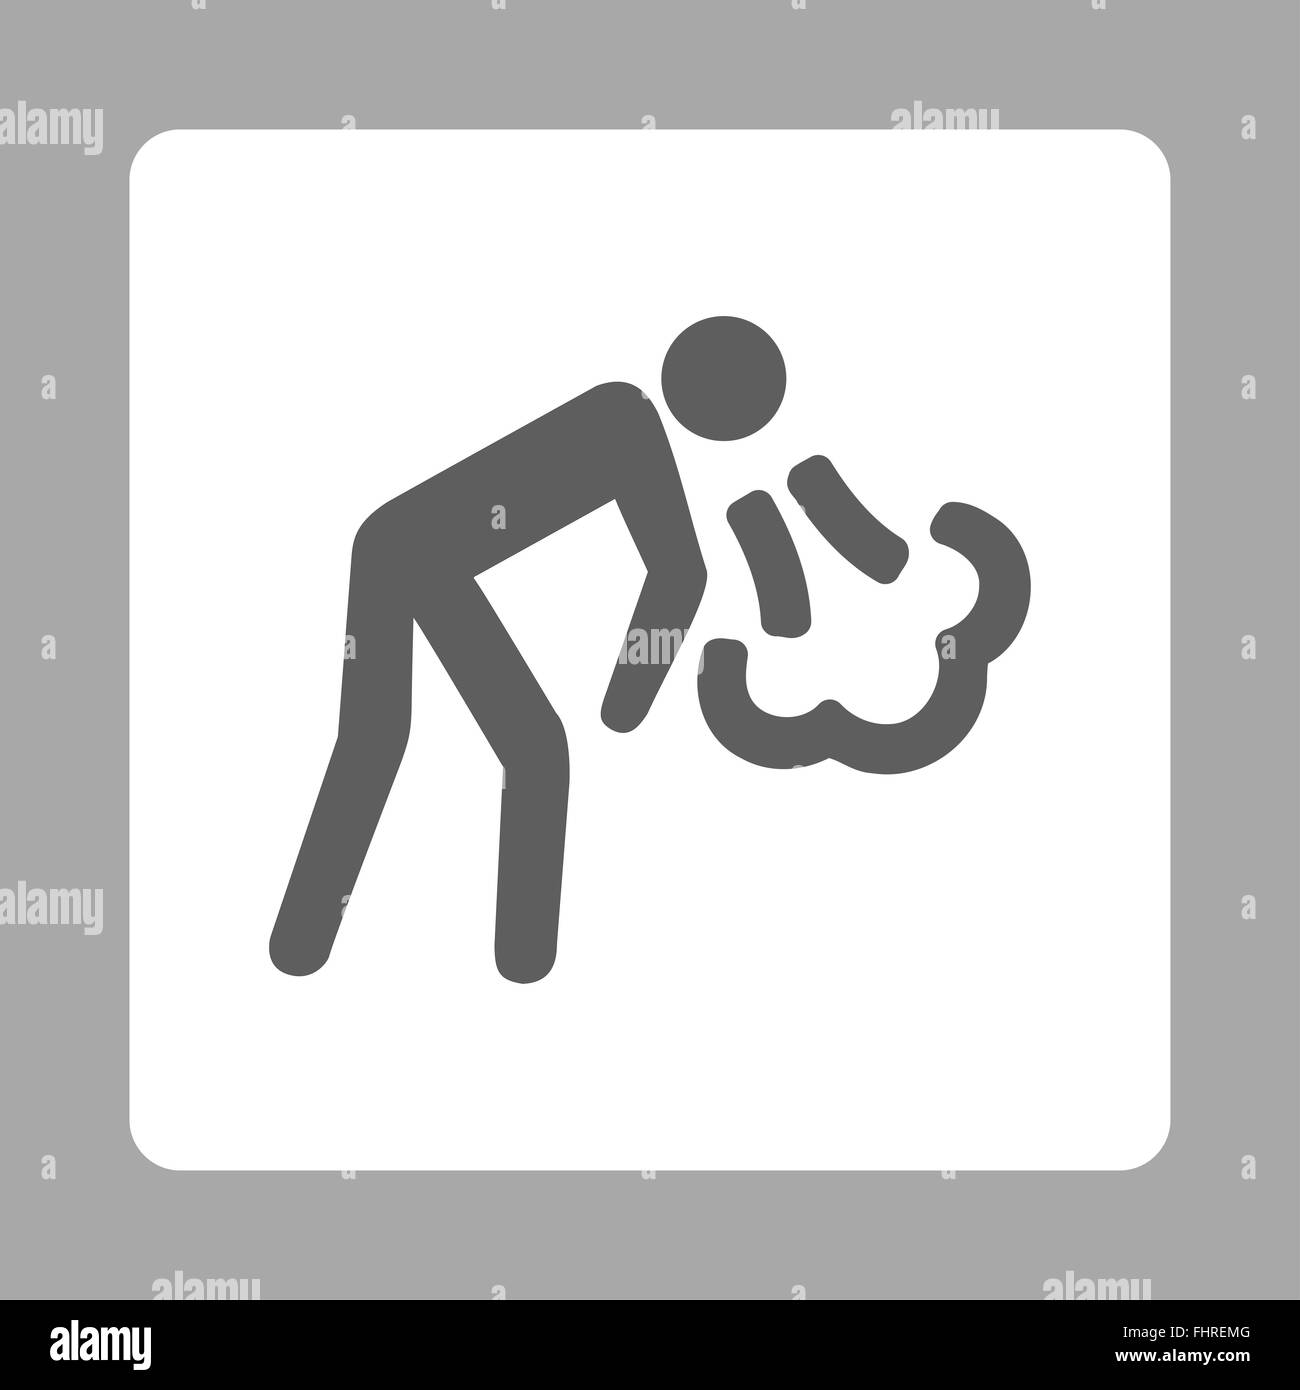 Vomiting Rounded Square Button Stock Photo